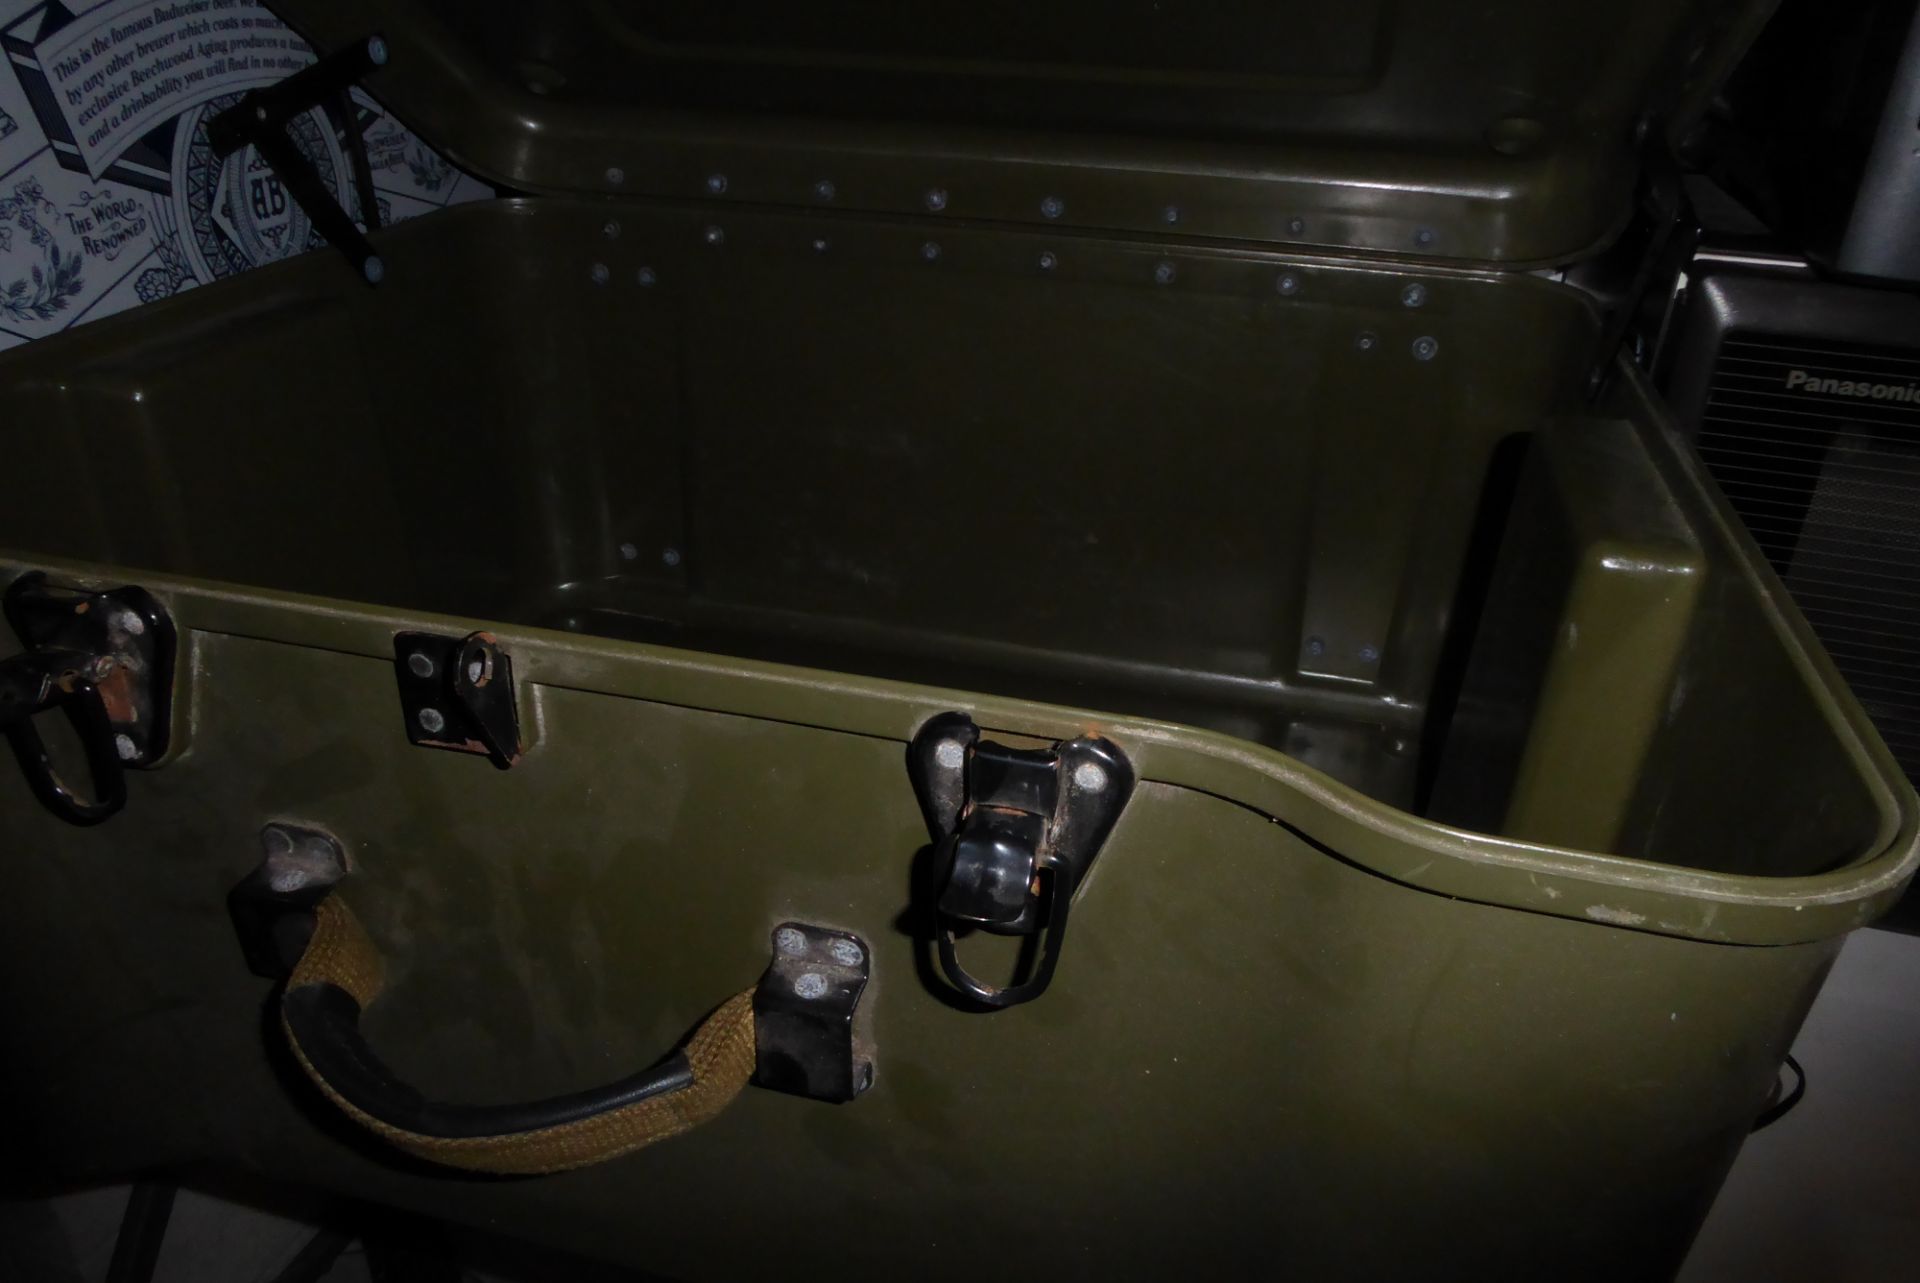 * 1x very cool army style packing case. 600x500x300 - Image 3 of 3